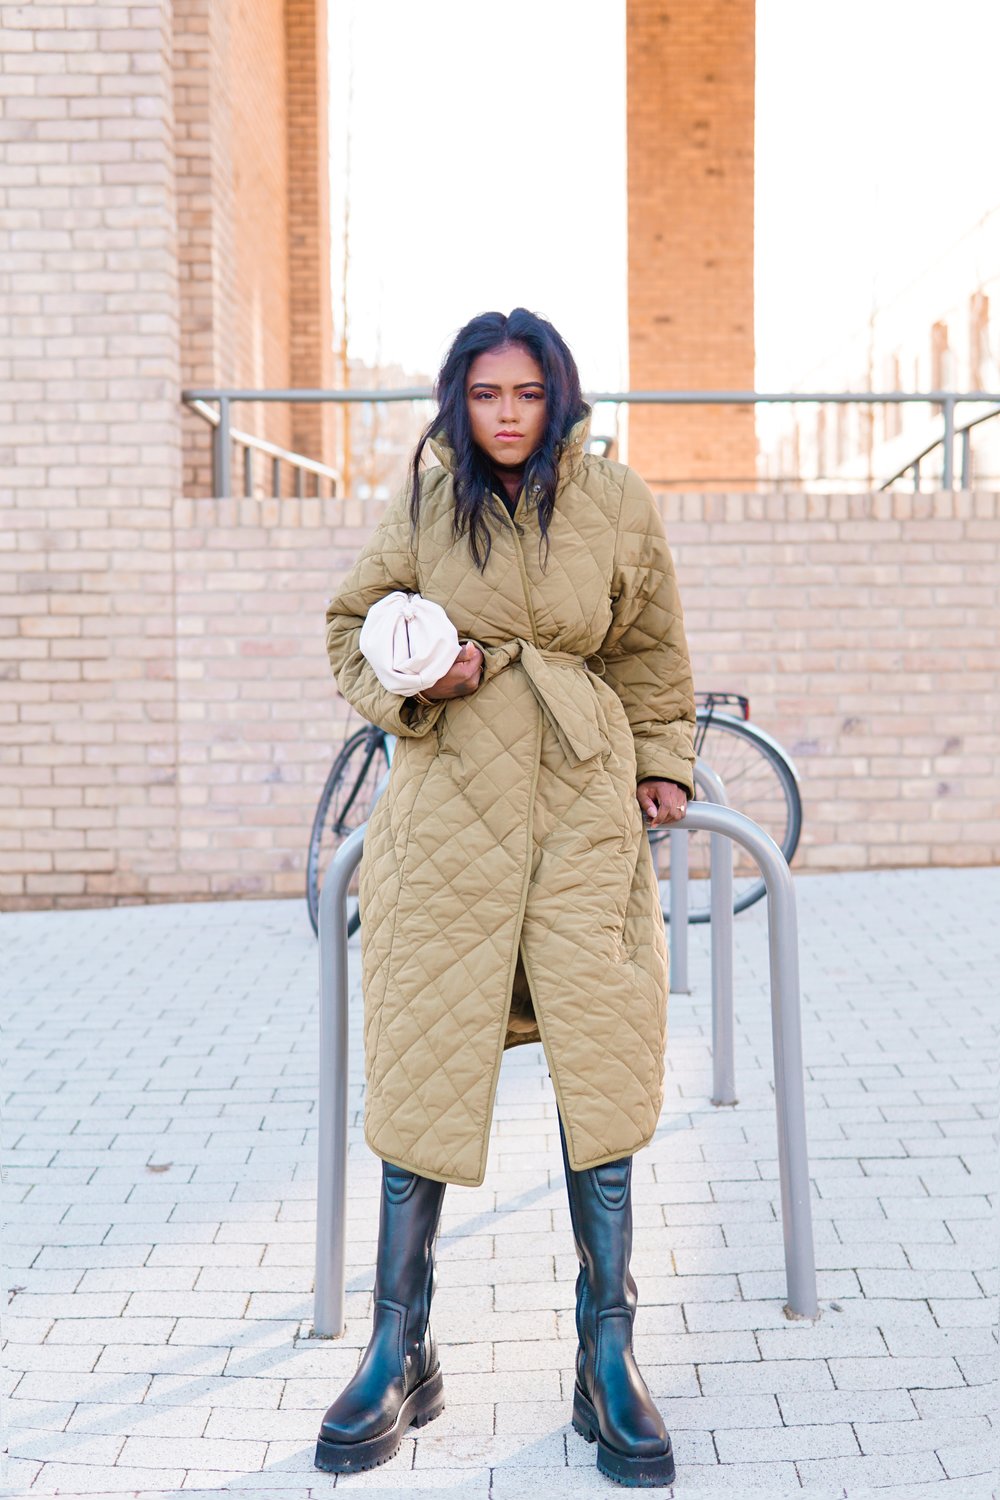 Sachini wearing a brown & Other Stories coat and black boots